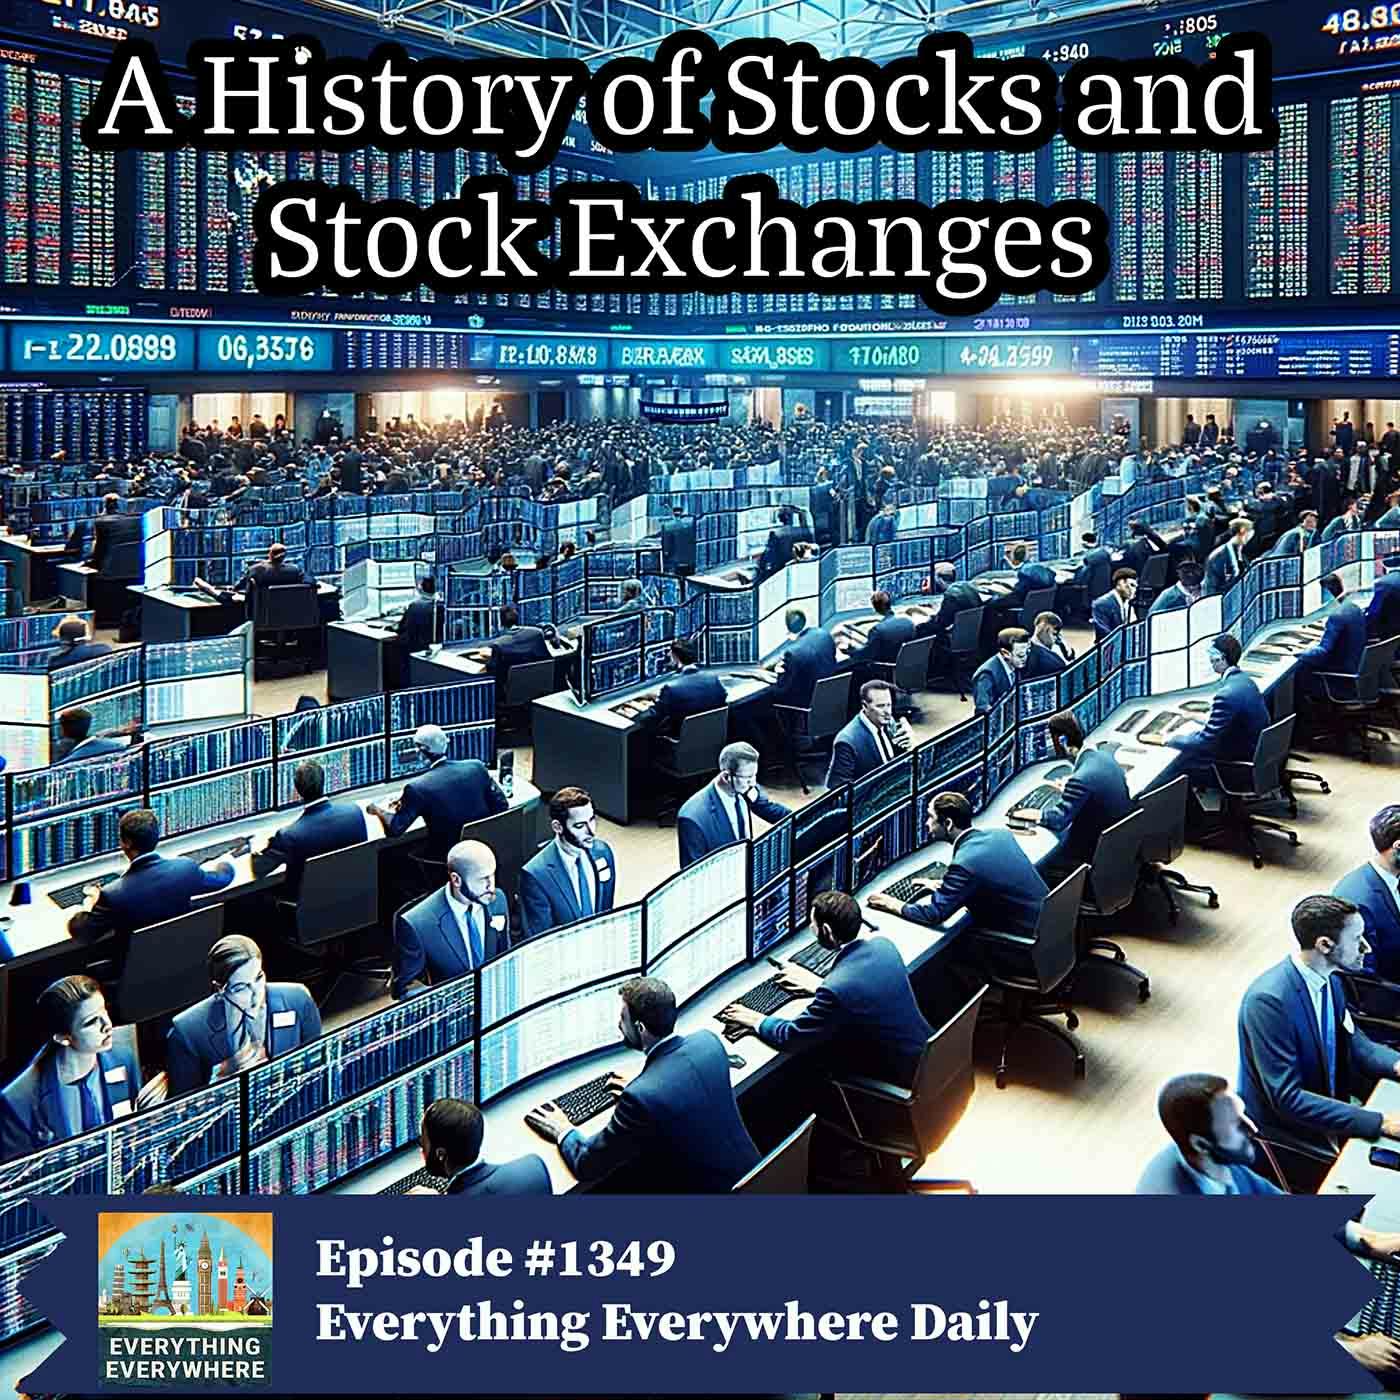 The History of Stocks and Stock Exchanges